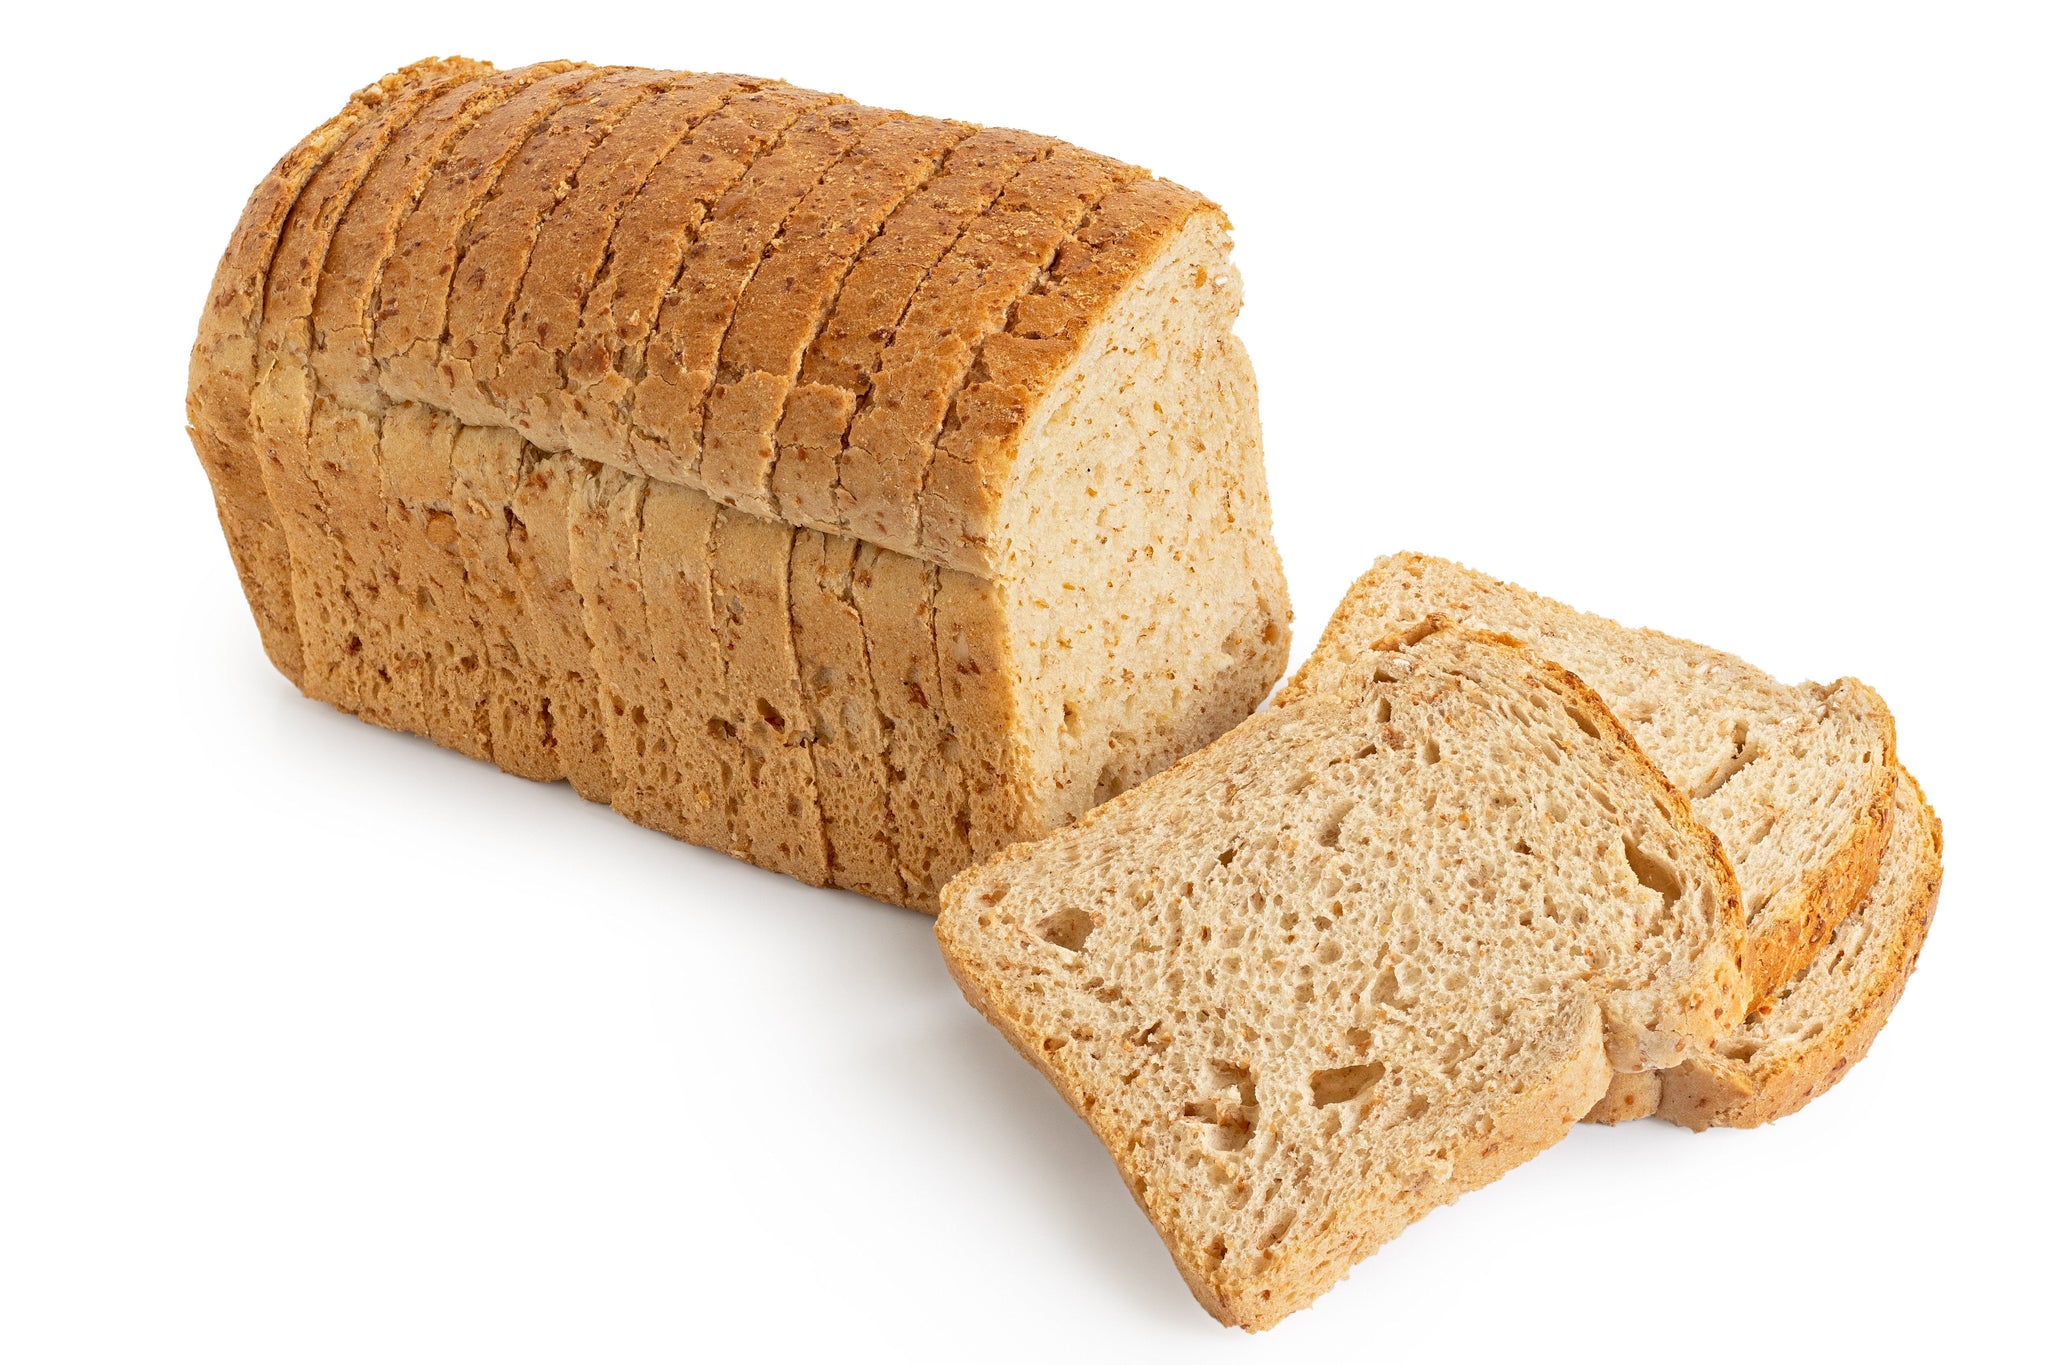 aba>Nature's Own Wholewheat Bread (sliced) - 1 loaf